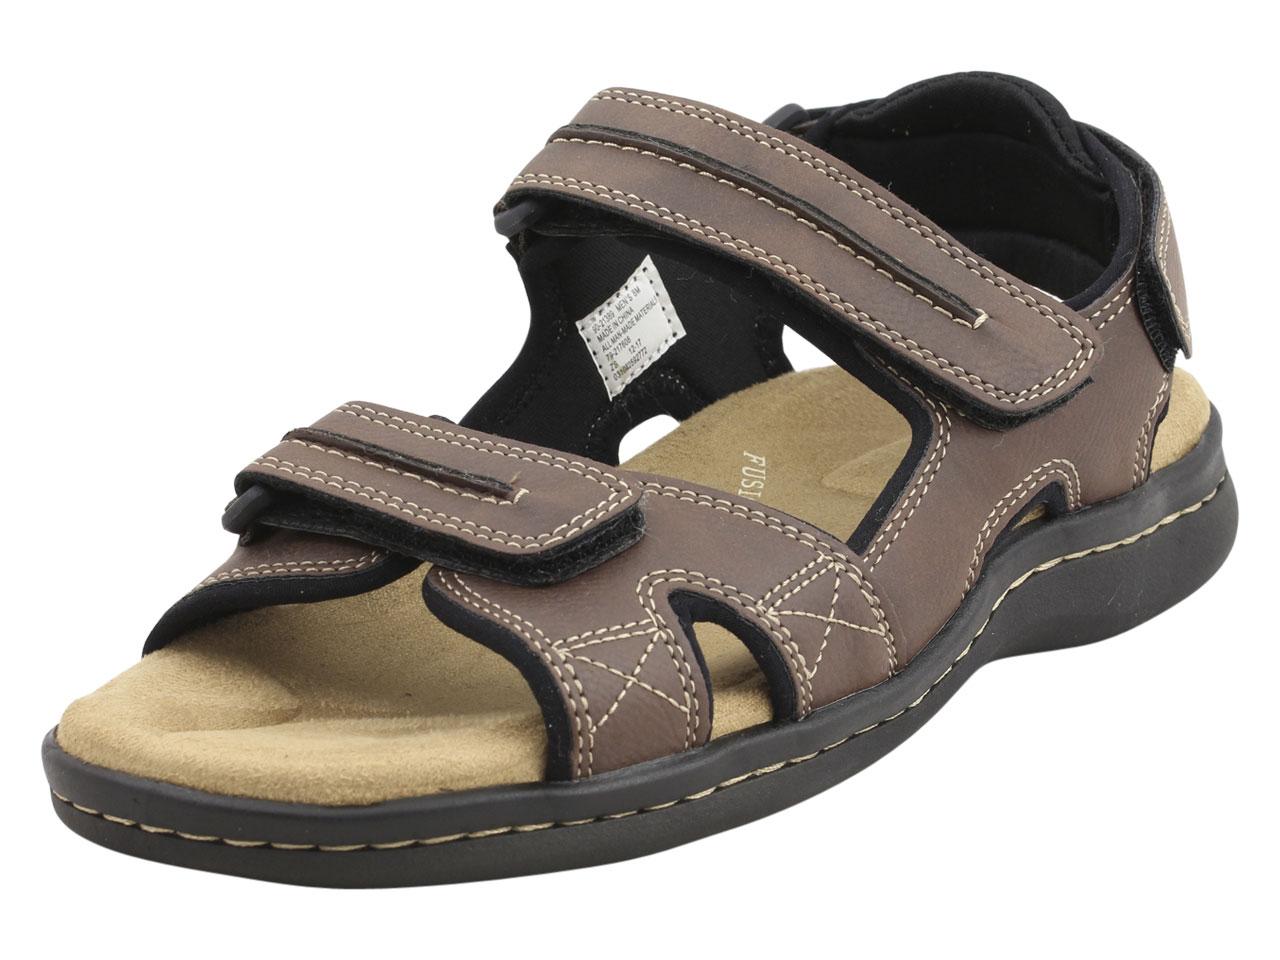 Newpage Memory Foam Sandals Shoes